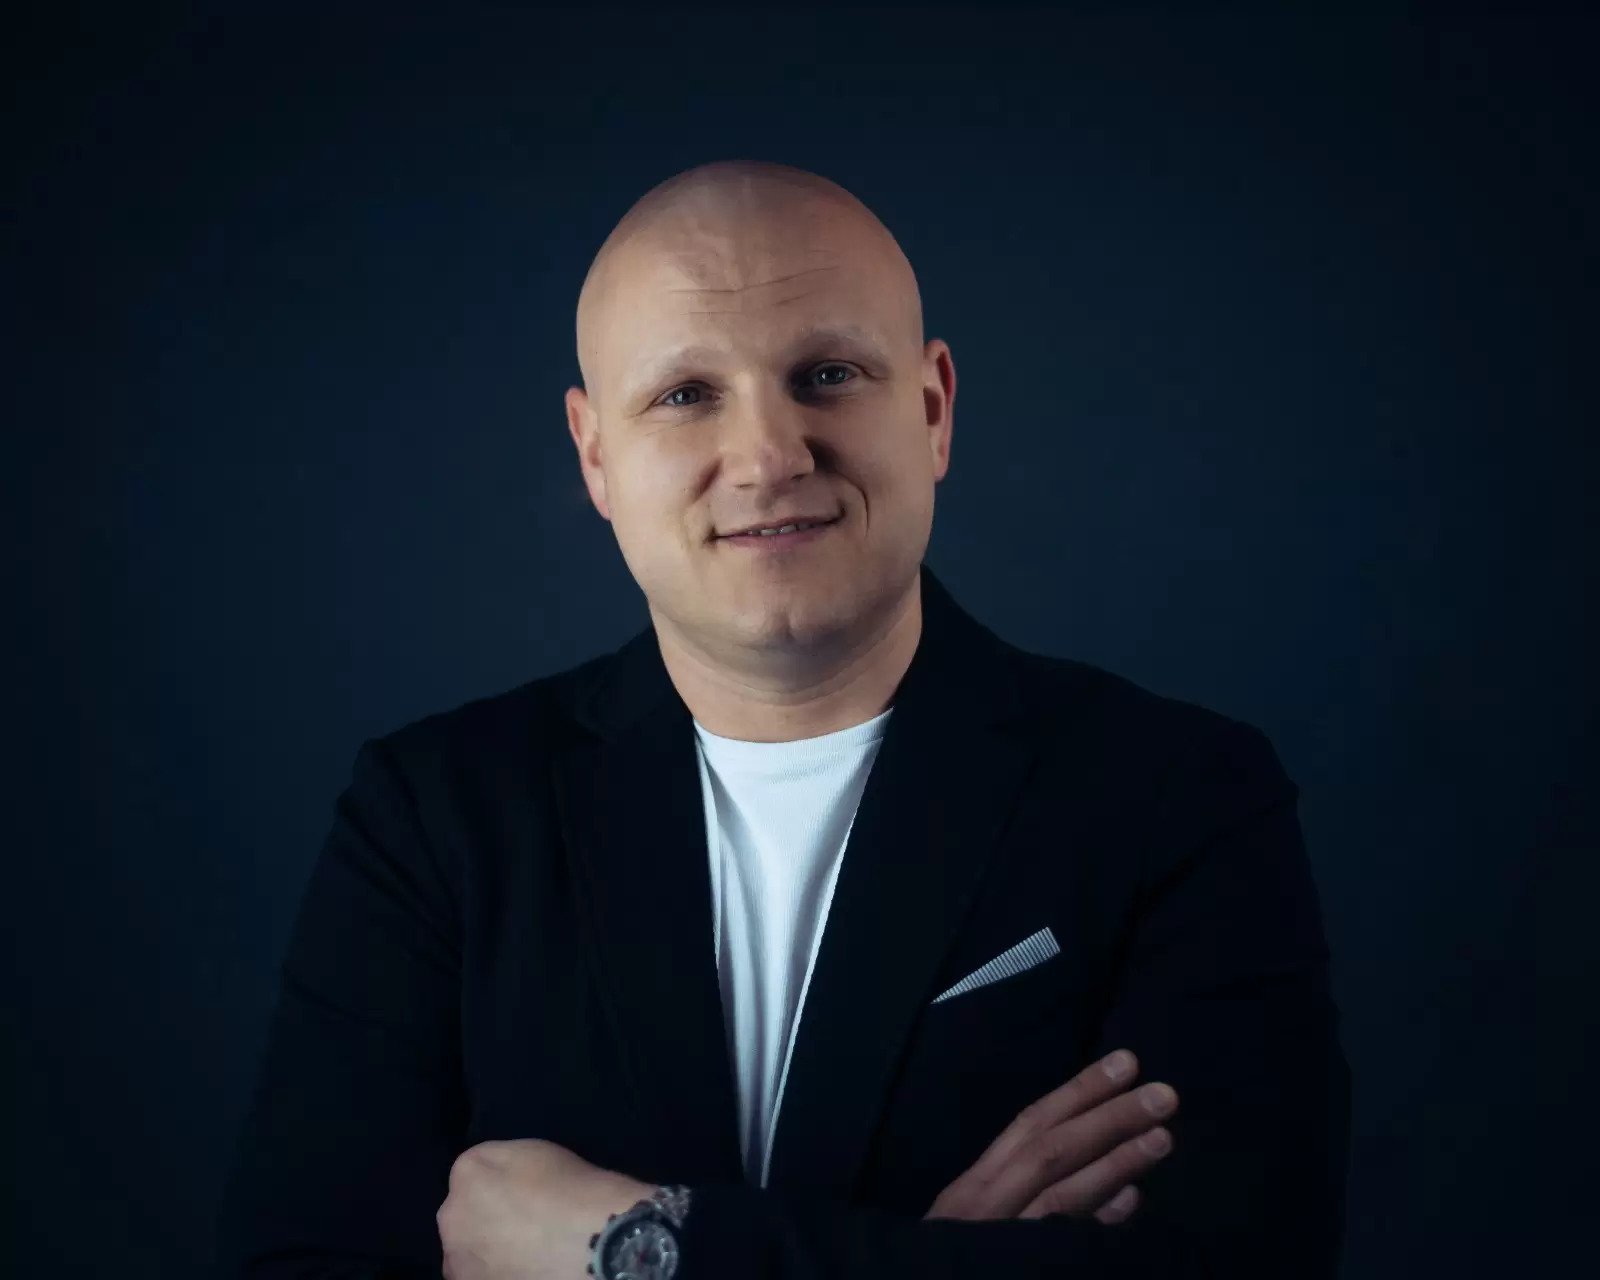 Bartlomiej Wozniak</p><p class='pteam'> Bianco Beauty and Academy Director, Bartek Wozniak, is championing the Eximia Concept in the UK, delivering effective and non-invasive anti-ageing and body contouring treatments, with incredible results, from his Milton Keynes clinic Bianco Beauty.</p><p class='pteam'> As the exclusive UK agent, Bianco Academy offers training with the sale of every machine. To deliver the Eximia Concept treatments, you will need your <a href='https://www.biancoacademy.com/training-courses/level-3-anatomy-and-physiology-training'>Level 3 Anatomy and Physiology</a> certification, which can also be achieved with Bianco Academy.</p><p class='pteam'> <a href='https://www.eximiaconcept.co.uk/contact-us'>Contact</a> Bartek today and bring the Eximia Concept to your clinic.</p><p>